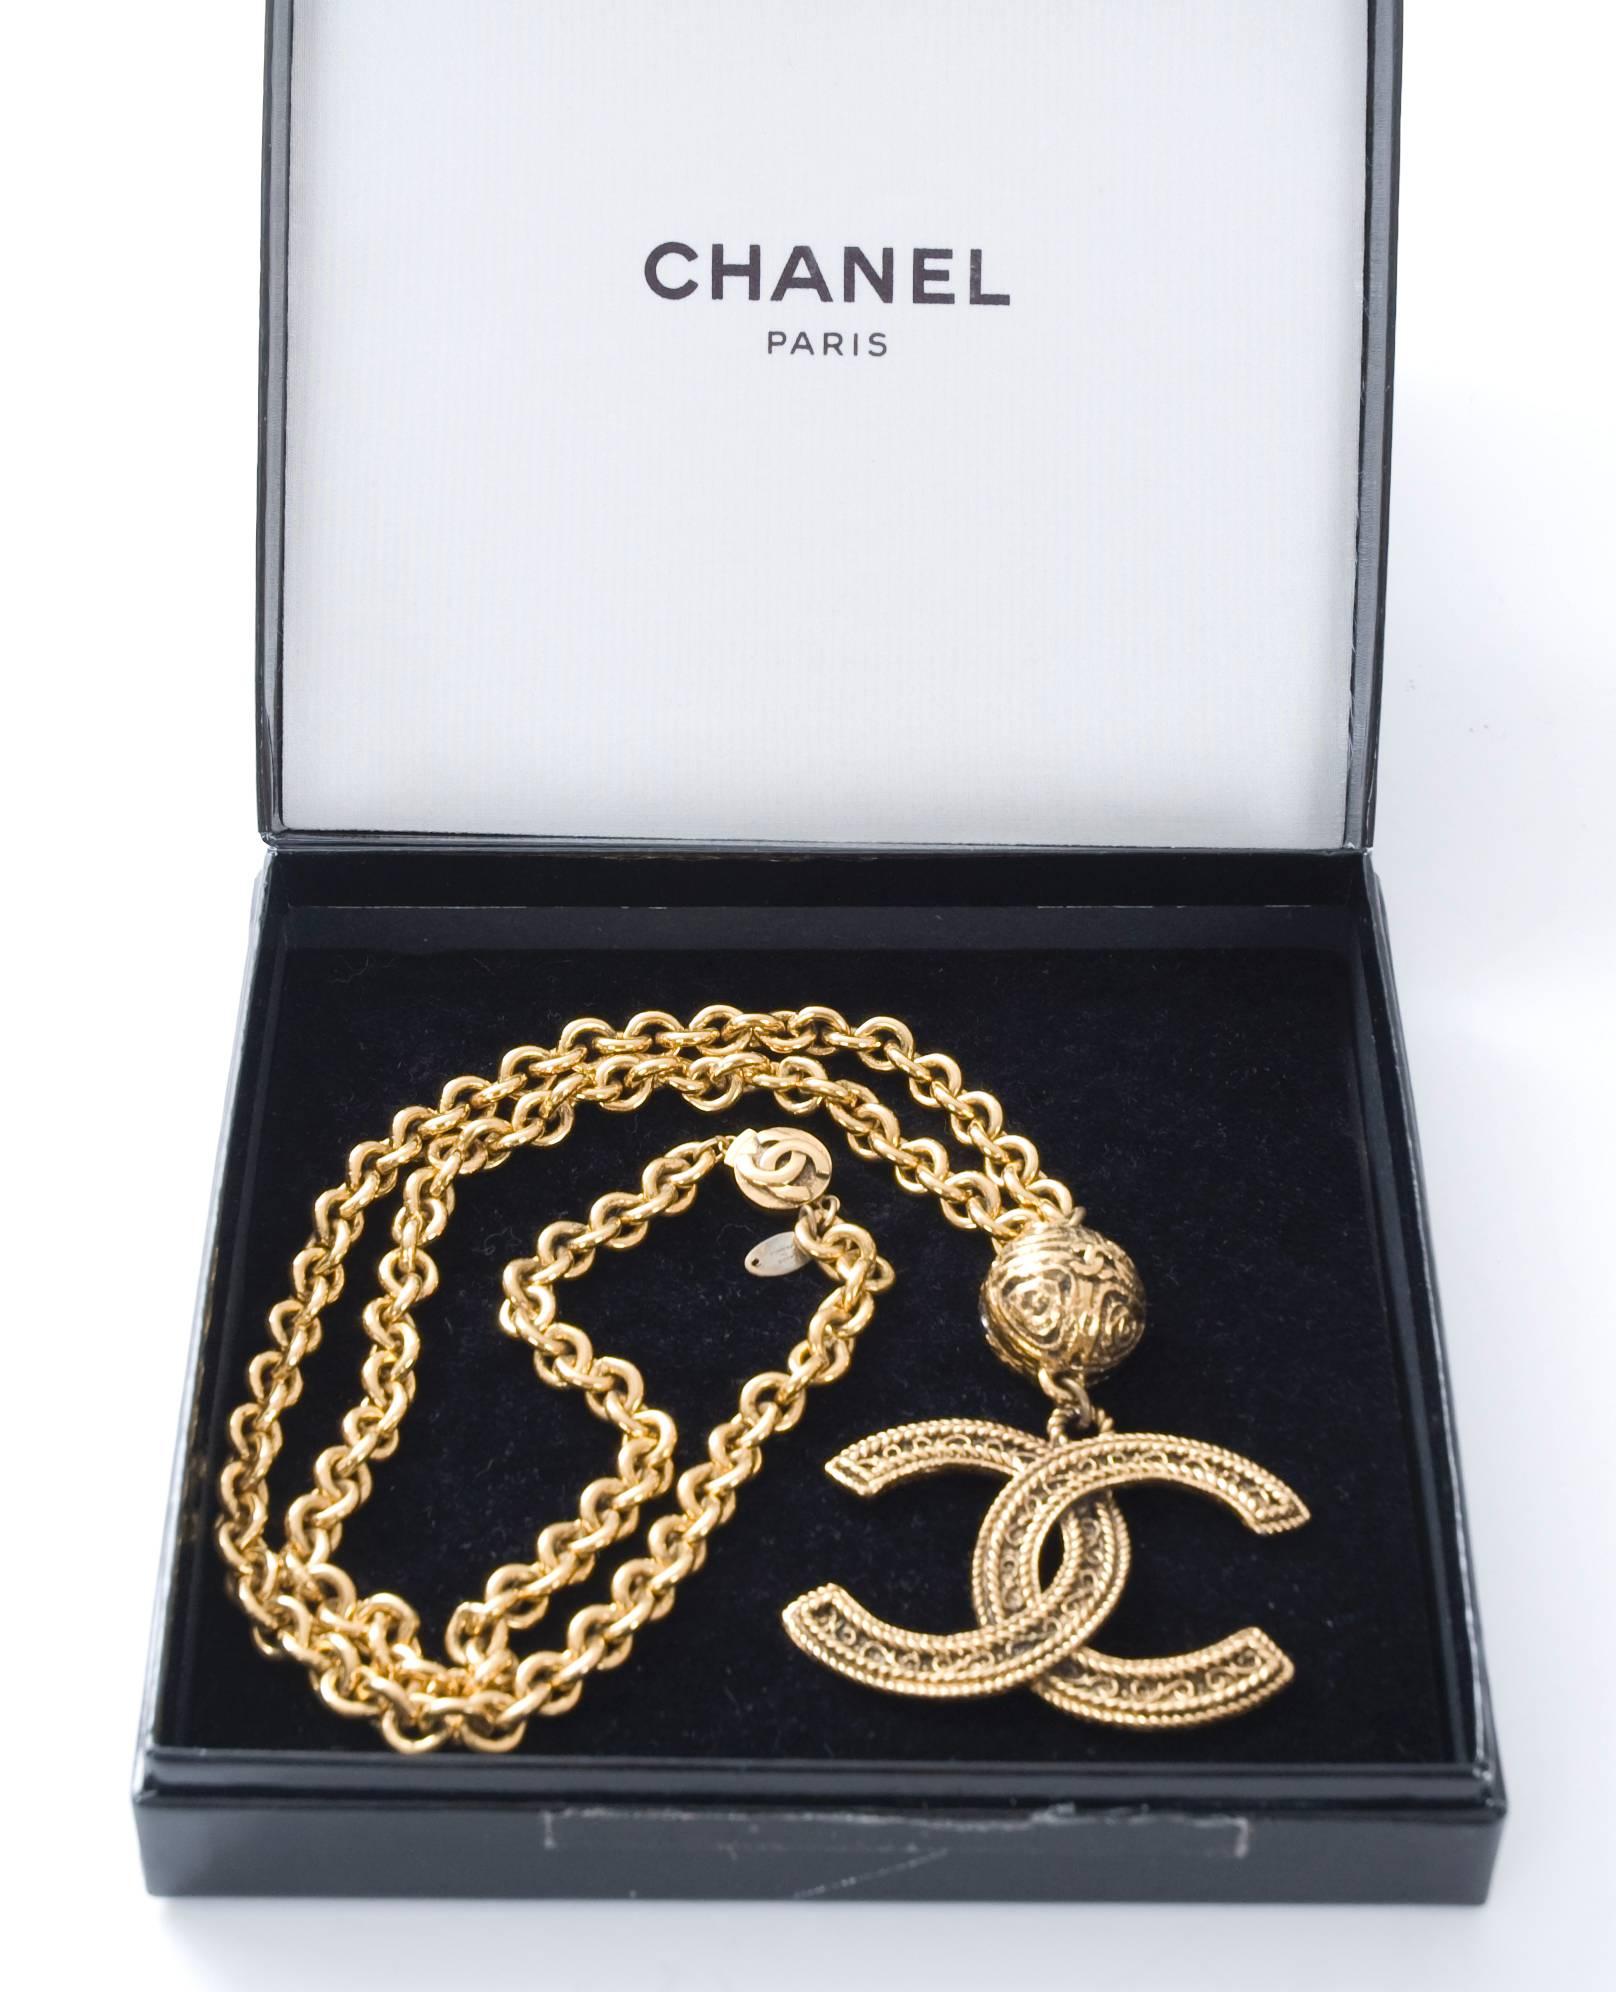 Chanel Paris long statement goldplated chain and oversized CC logo pendant with ball detail. 
Year stamp 1985.
Measurement: 15